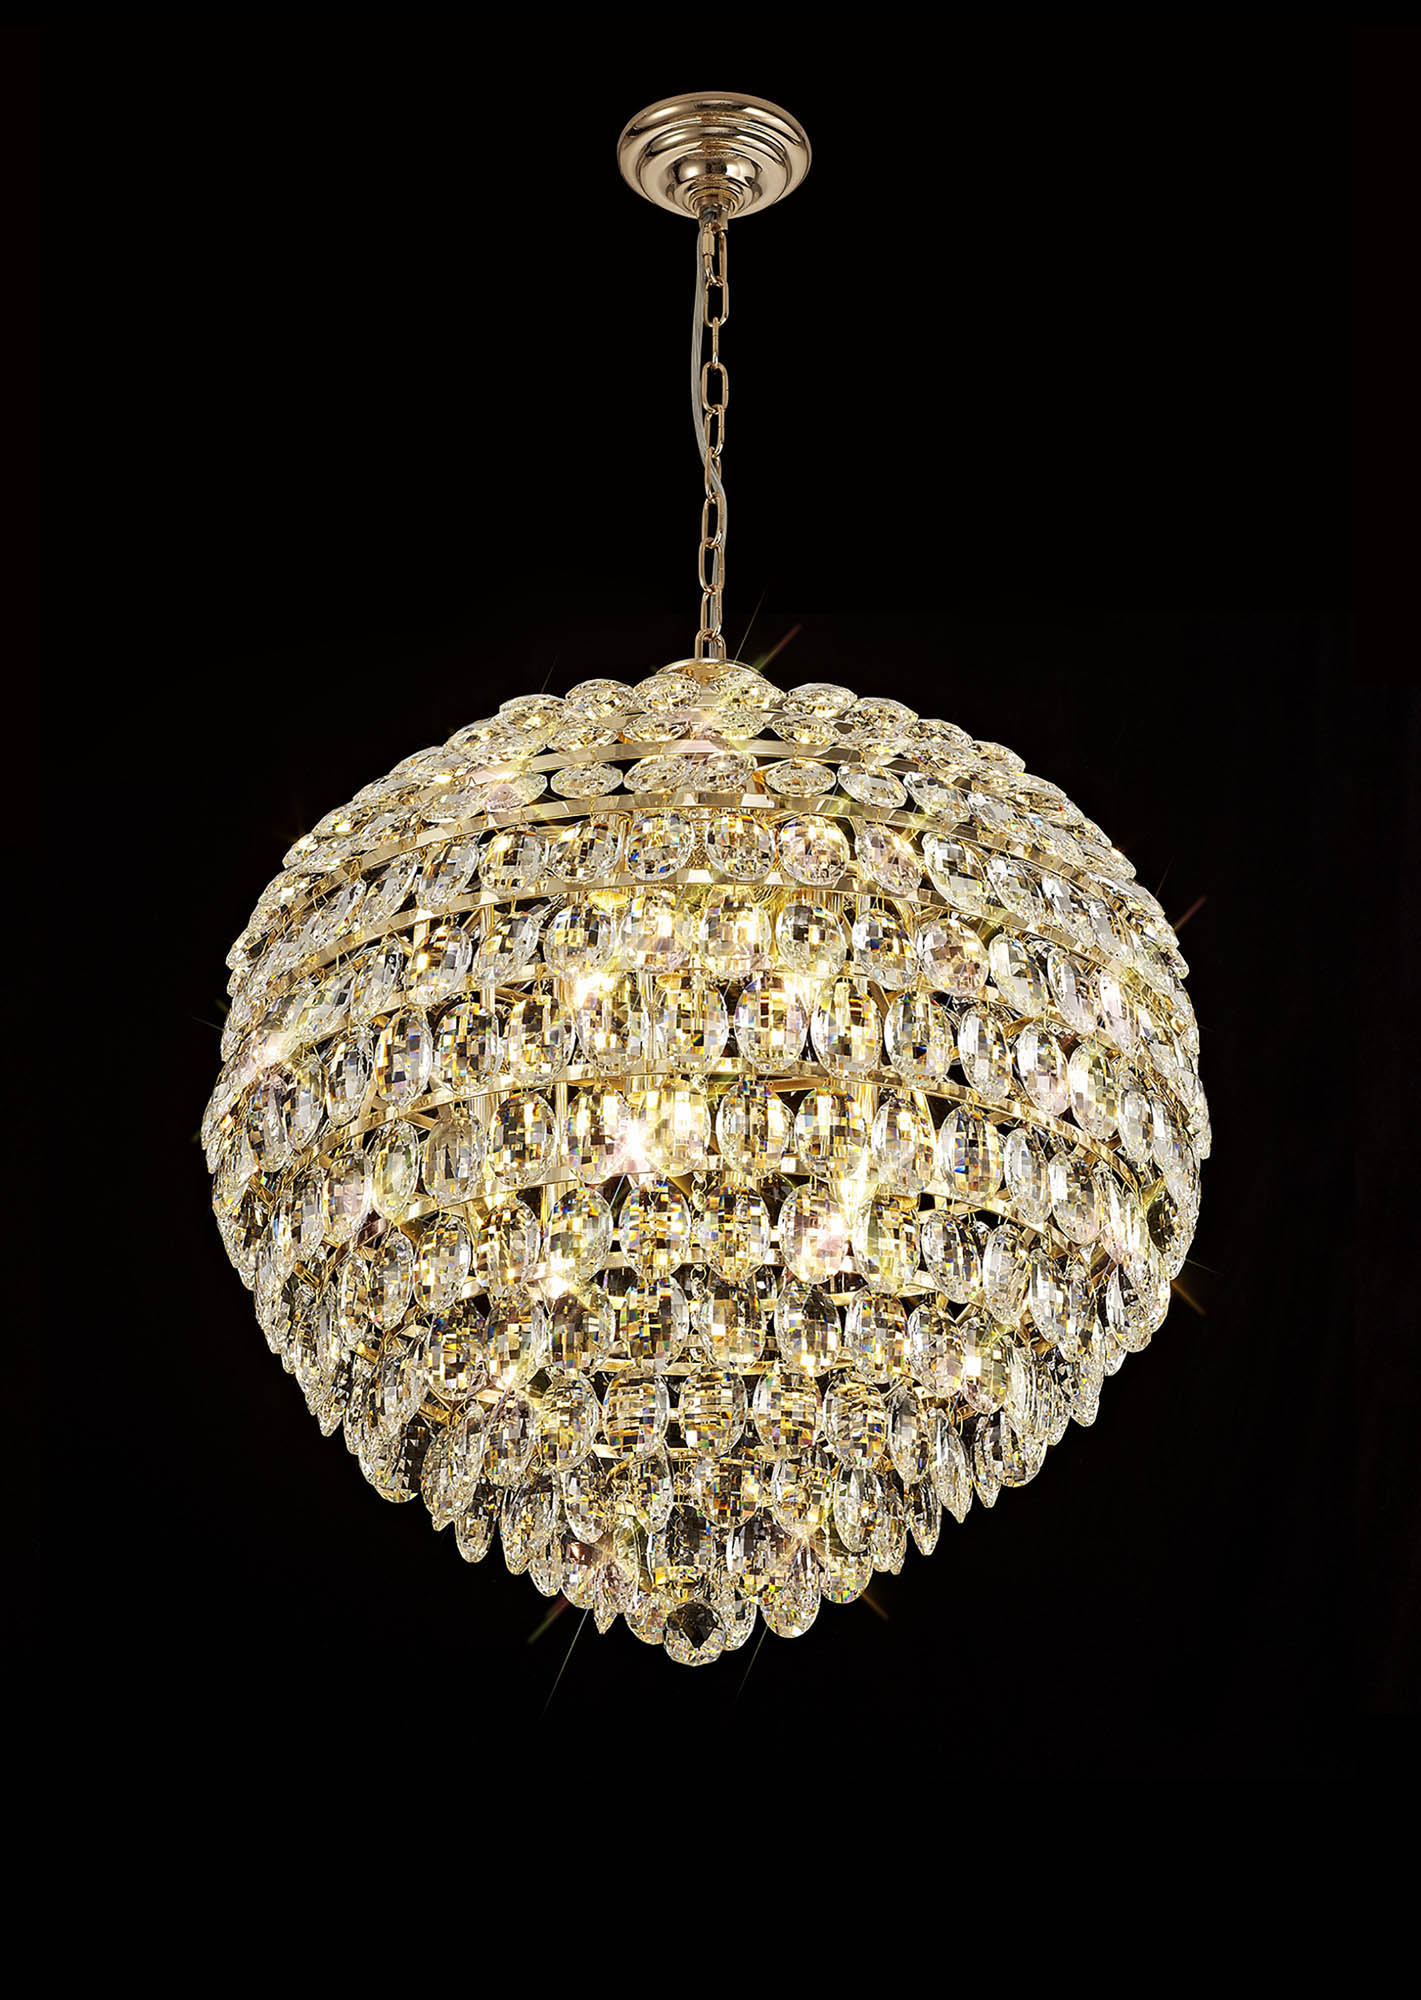 Coniston French Gold Crystal Ceiling Lights Diyas Contemporary Crystal Ceiling Lights